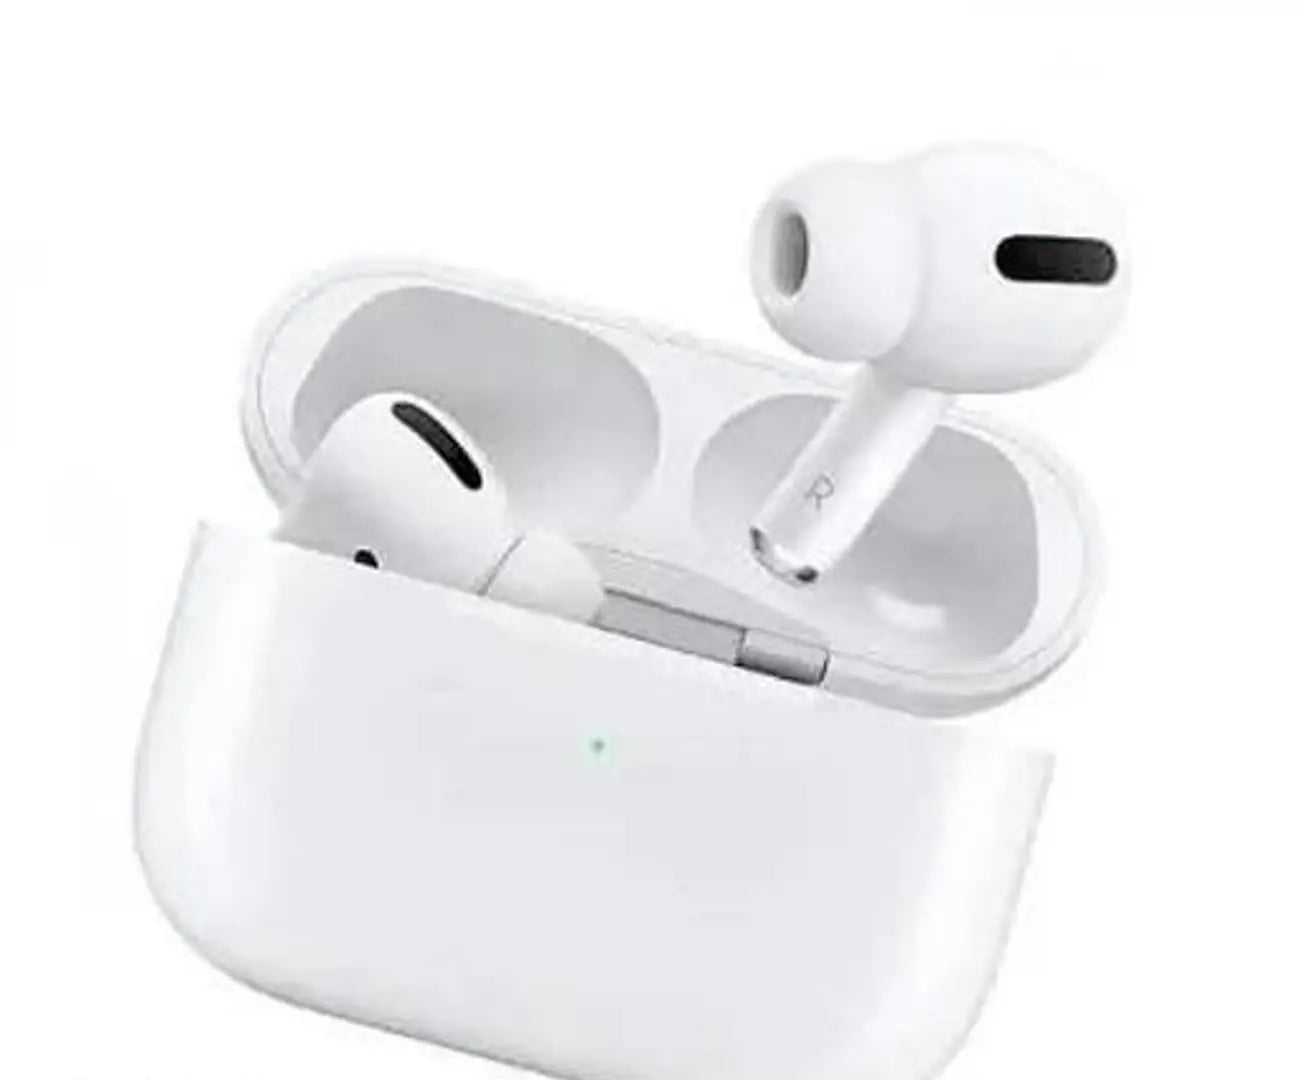 ANC Airpod Pro for IOS and Smartphone